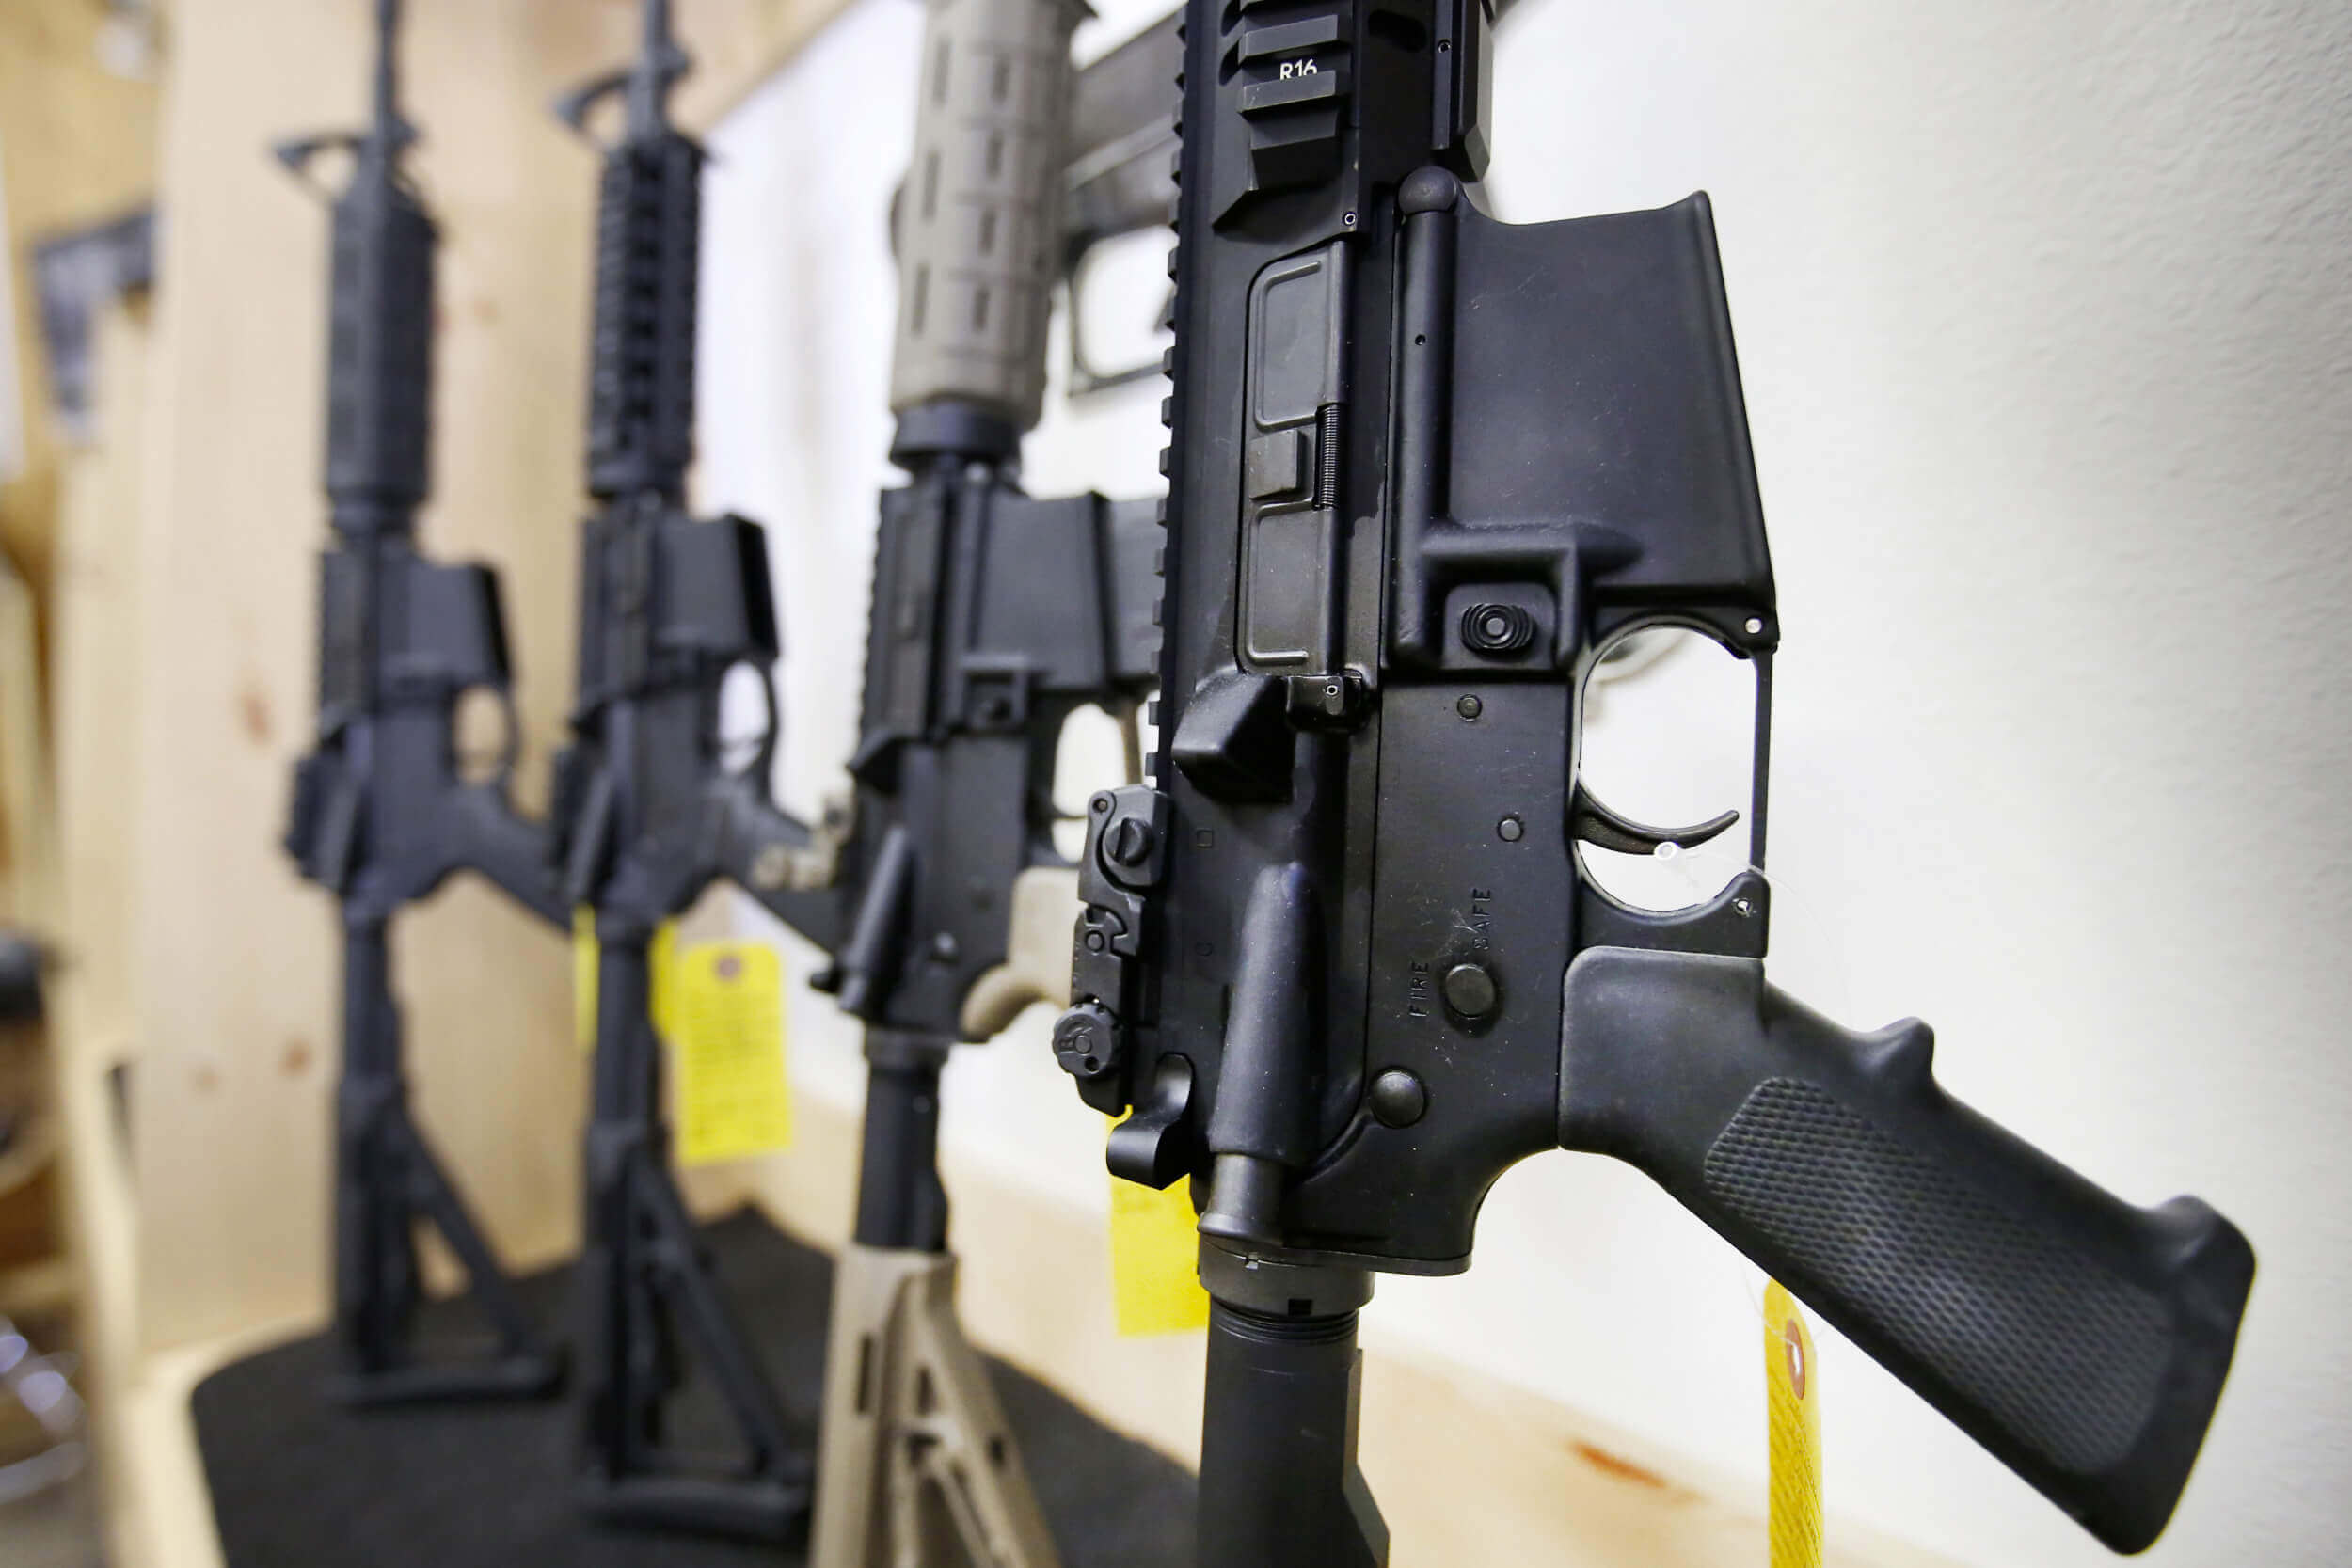 Top Democrat Blasts Rules Which Could Ease Oversight of Firearms Exports